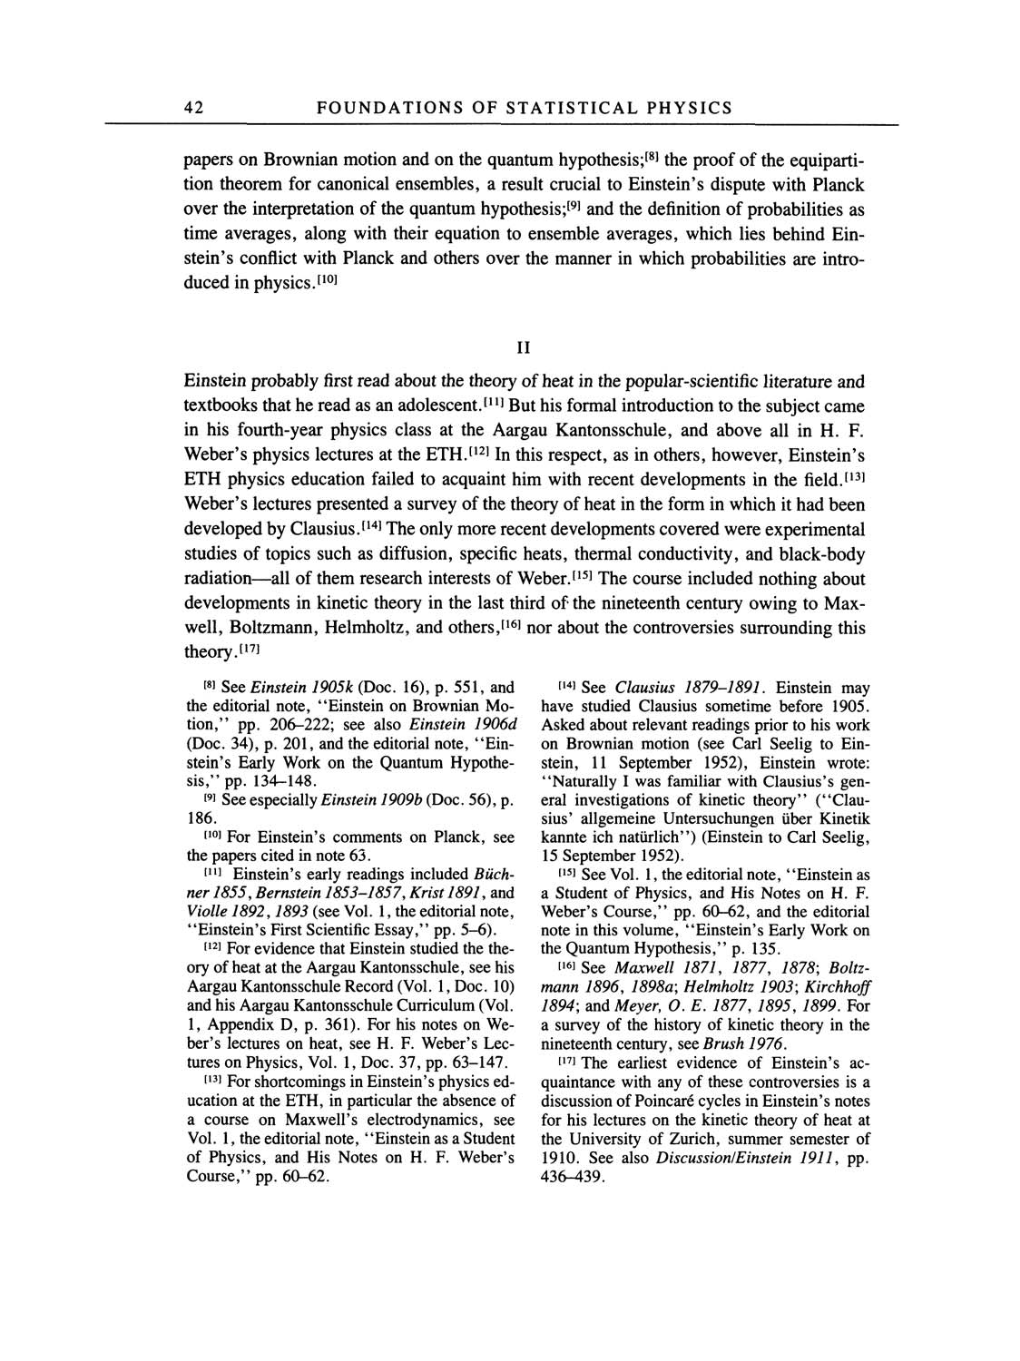 Volume 2: The Swiss Years: Writings, 1900-1909 page 42